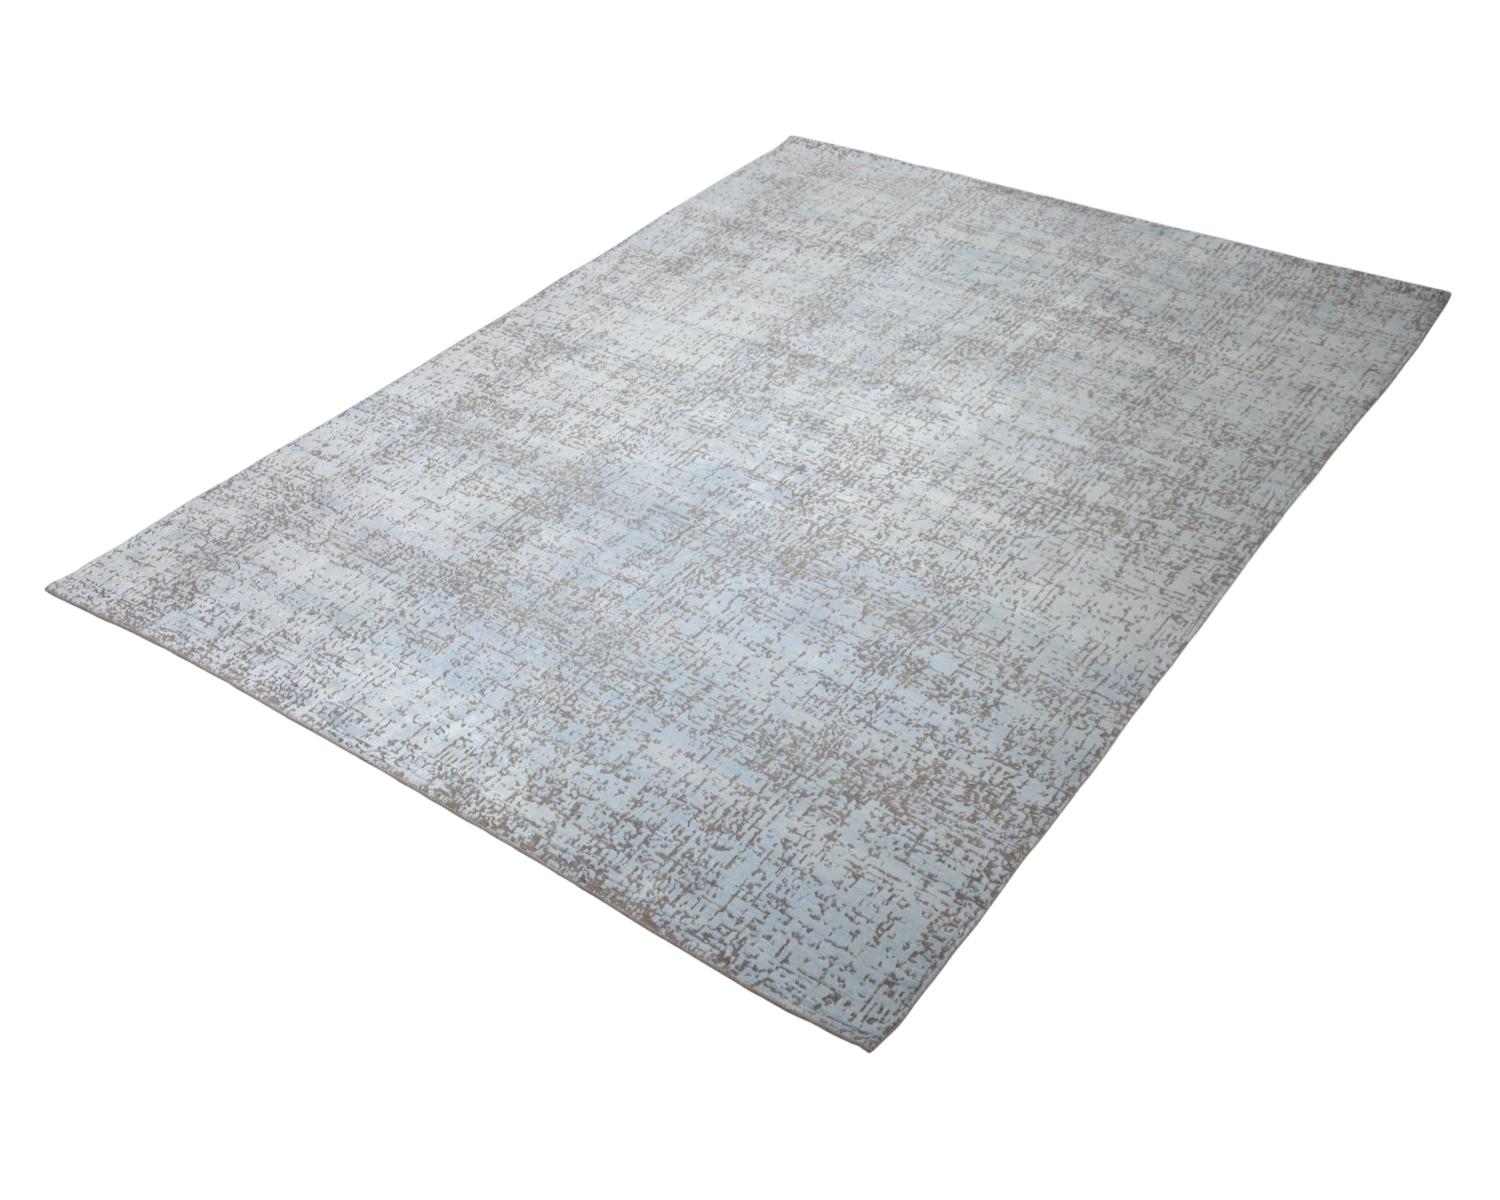 One-of-a-Kind Modern Wool Viscose Blend Hand-Knotted Area Rug, Mist, 8 x 10' 1 3